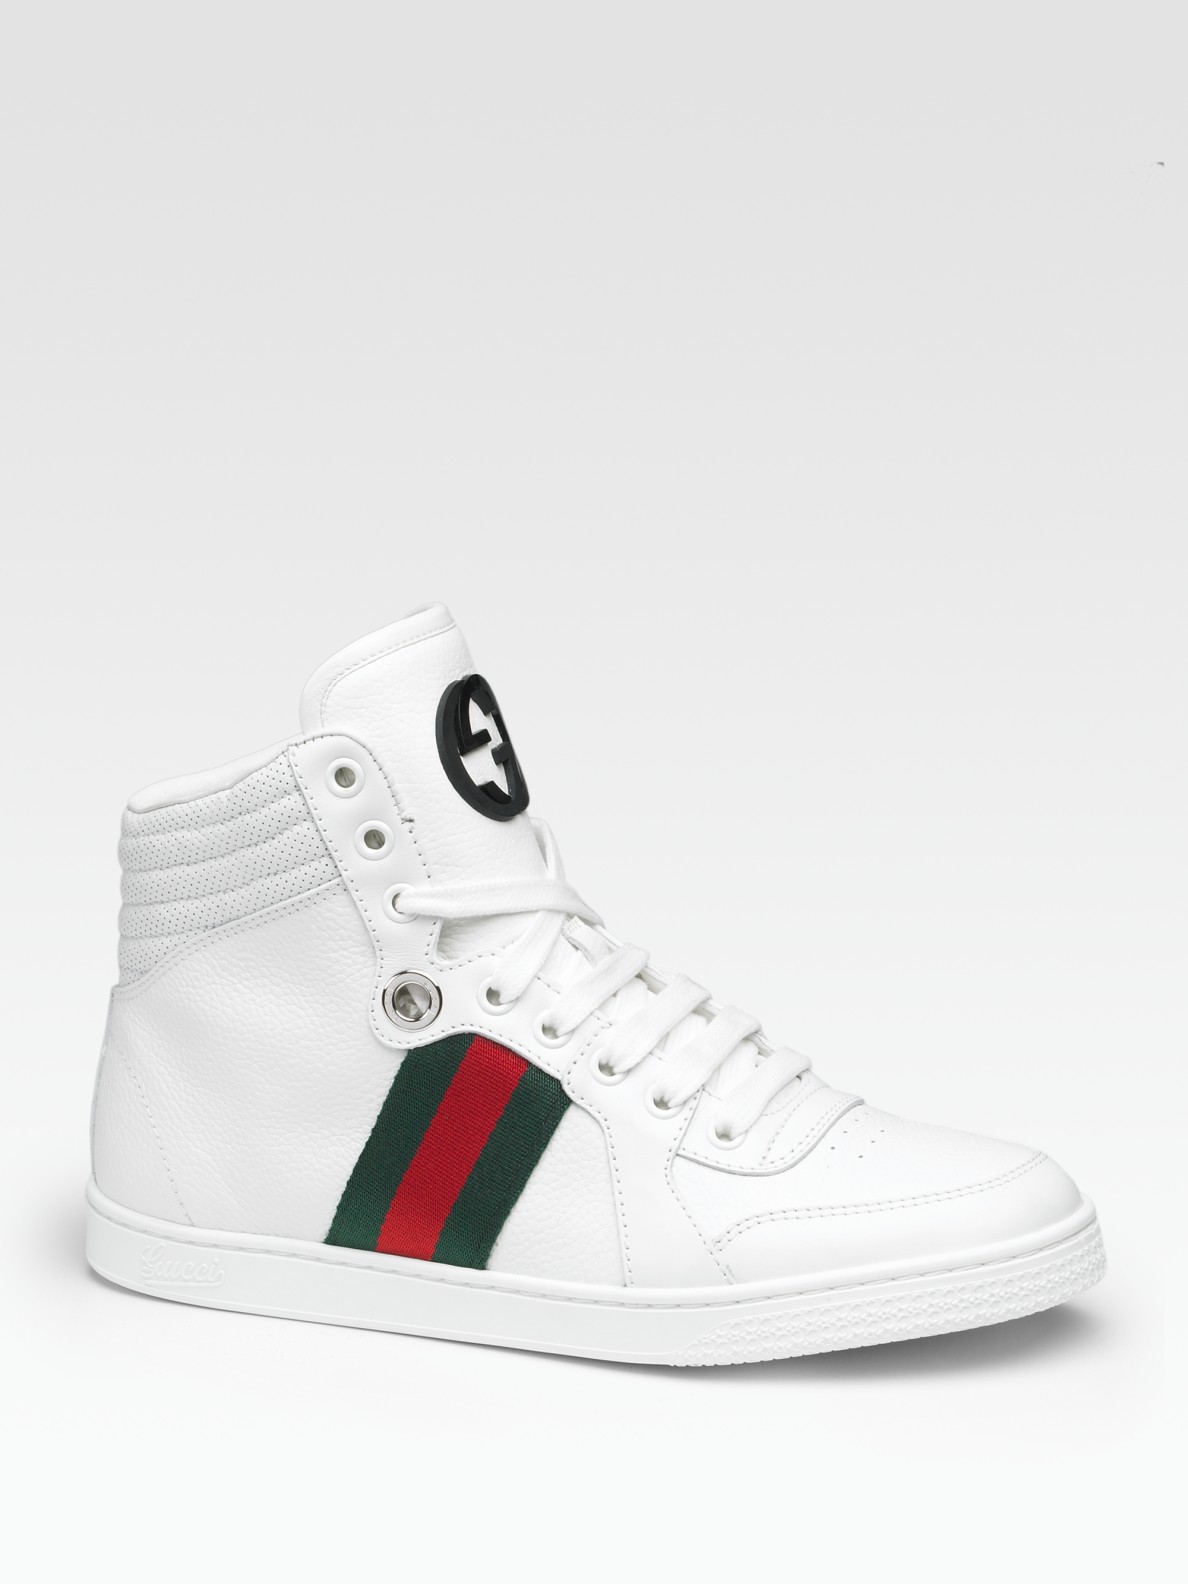 Gucci Coda Leather Lace-up Sneakers in White - Lyst